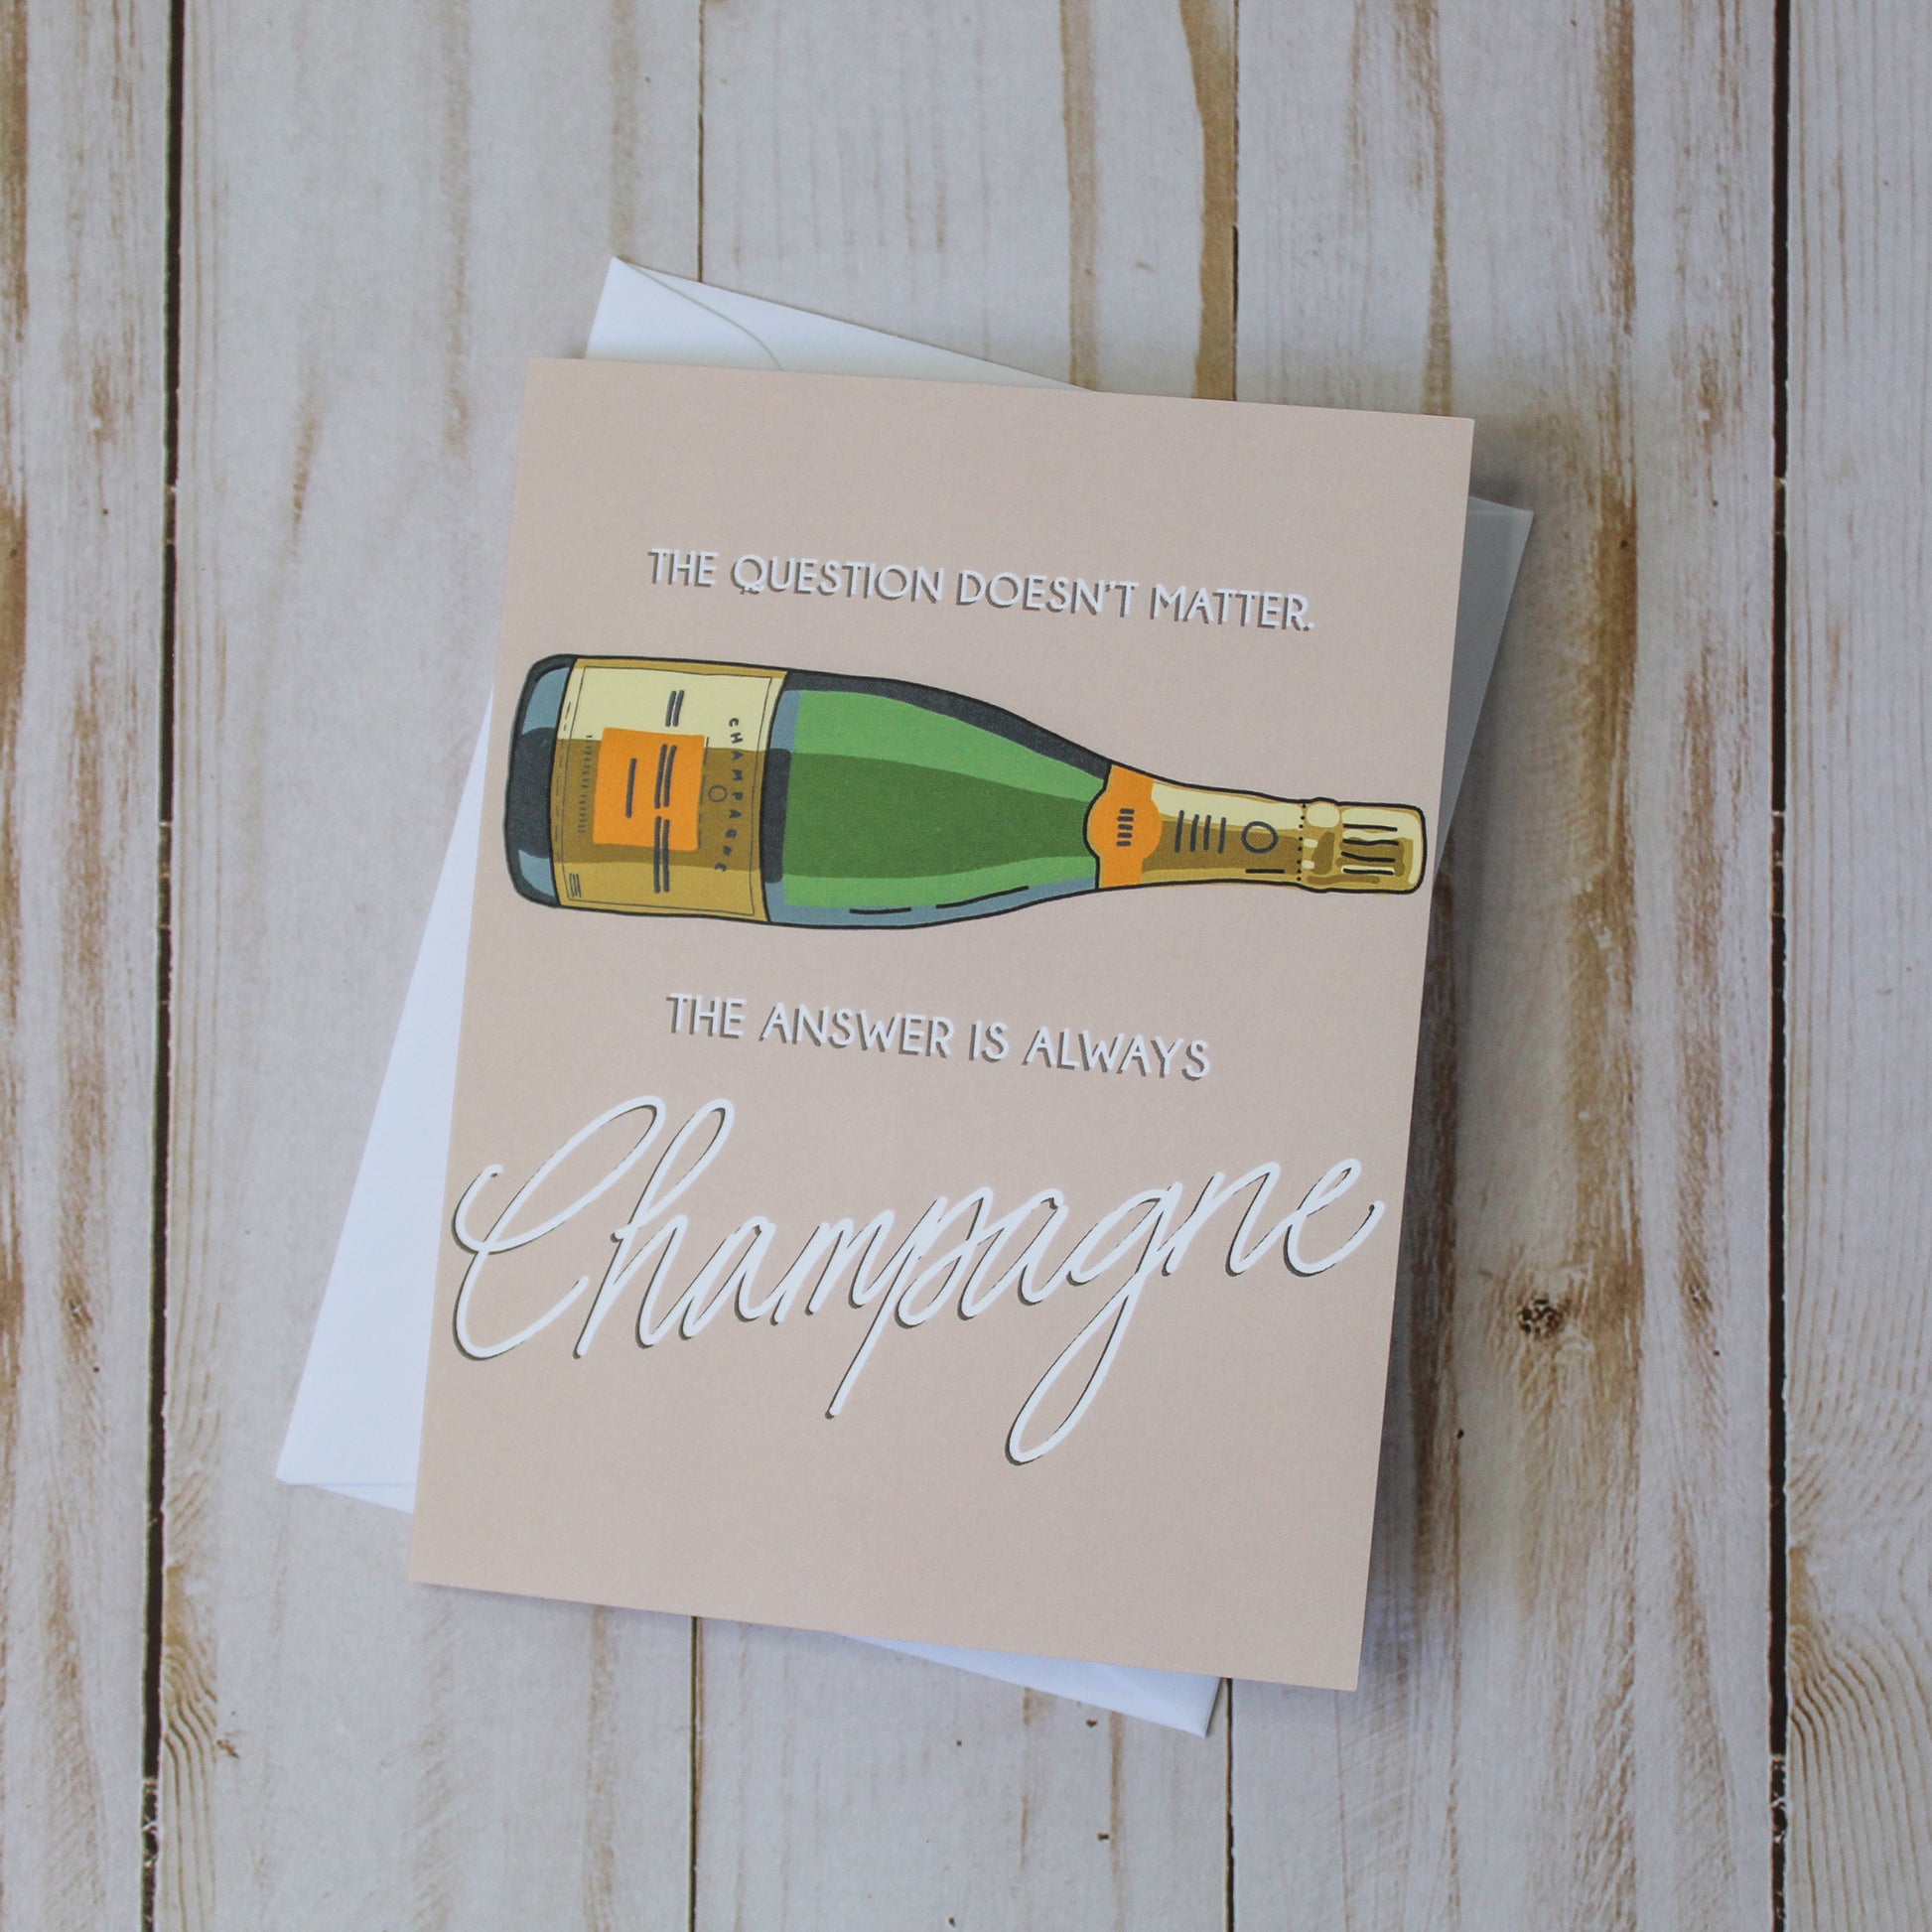 The question doesn't matter, Champagne is Always the Answer!', generic funny greeting card